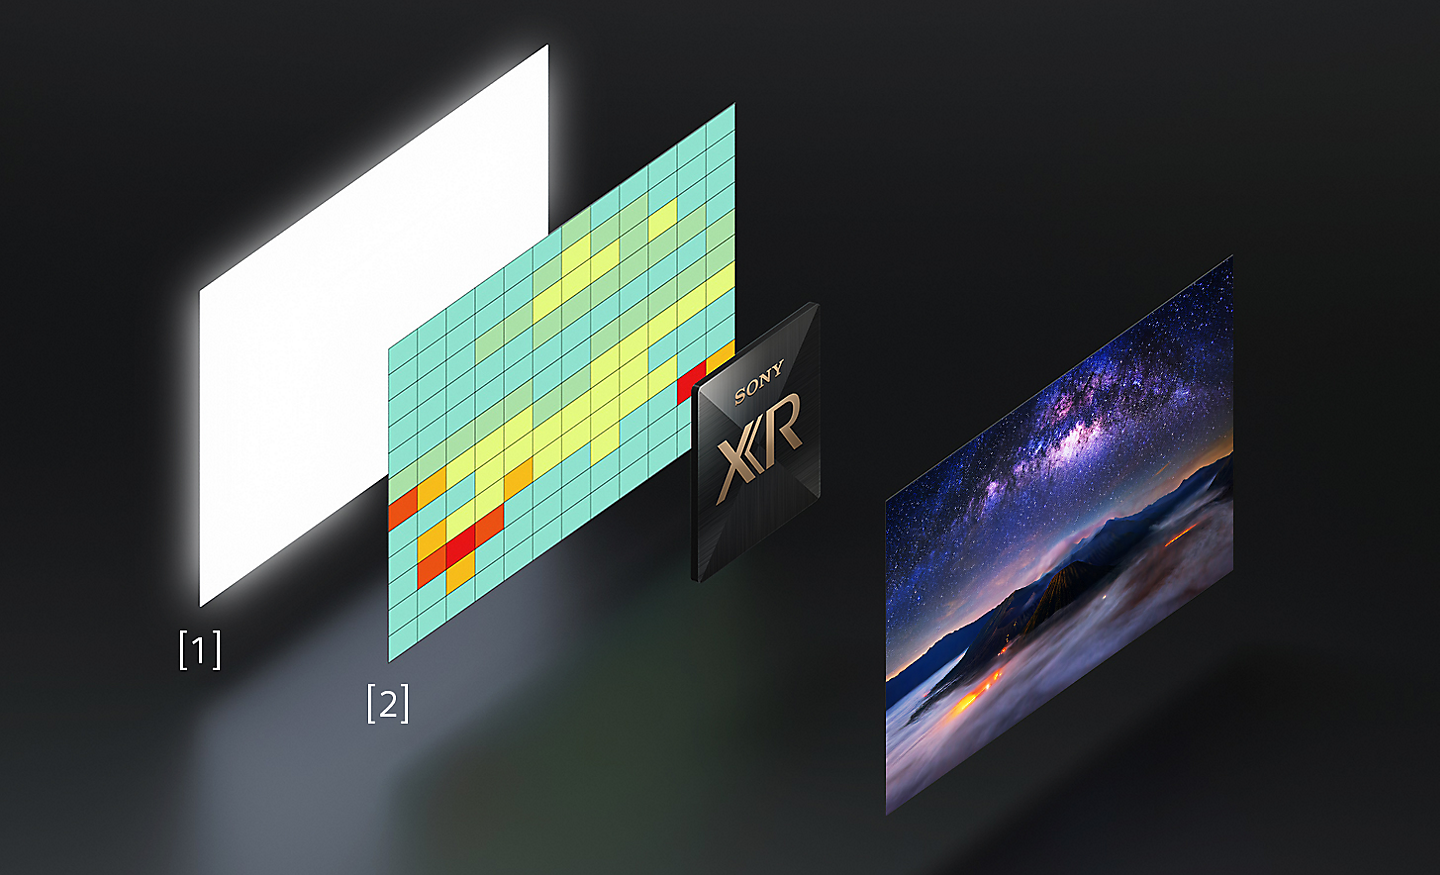 Graphic showing angled images of the high luminance panel and temperature distribution mapping on the left, and an angled image of a BRAVIA screen full of colour on the right